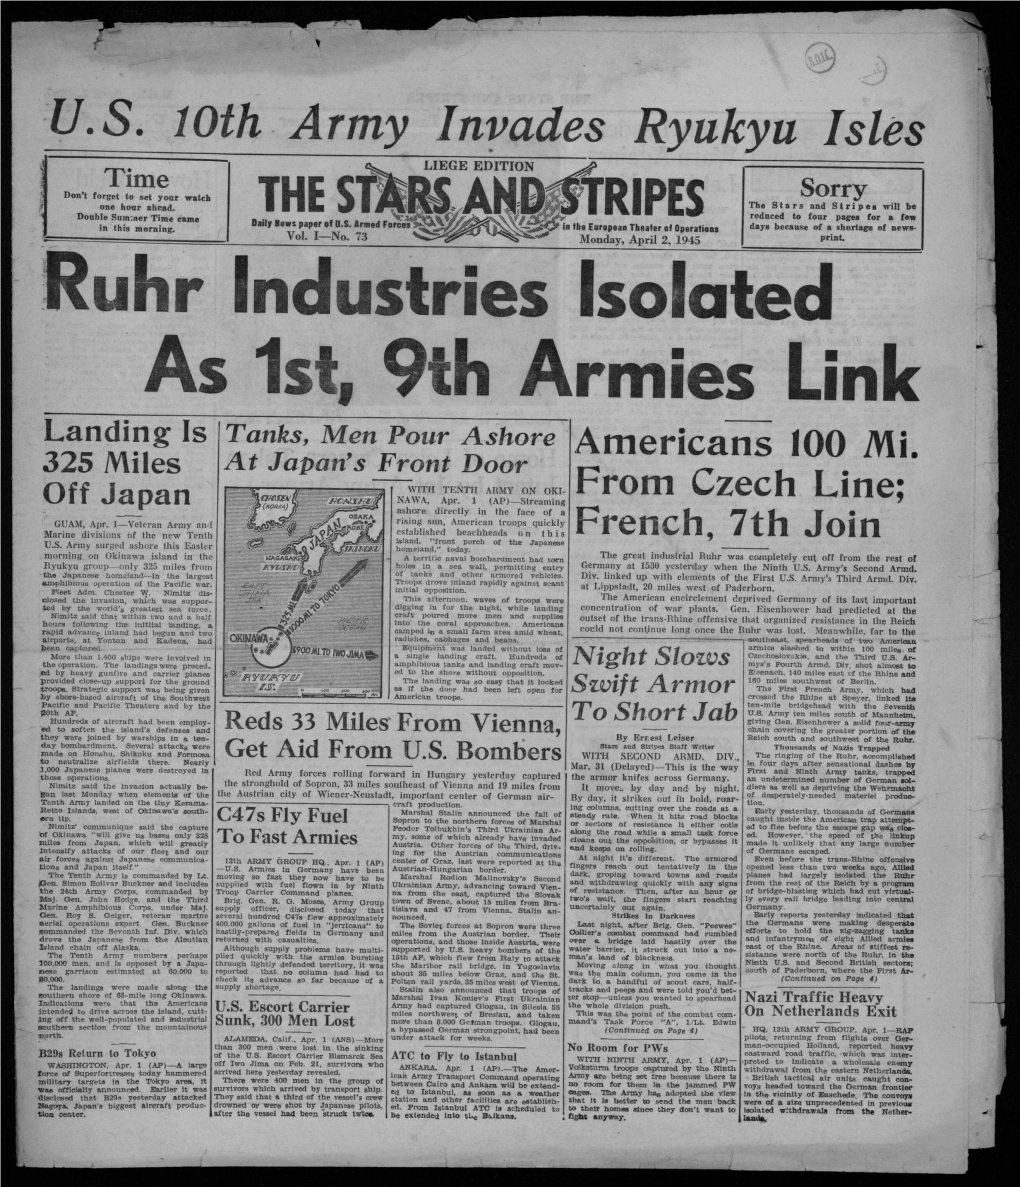 Ruhr Industries Isolated As 1St. 9Th Armies Link Landing Is Tanks, Men Pour Ashore 325 Miles at Japan's Front Door Americans 100 Mi